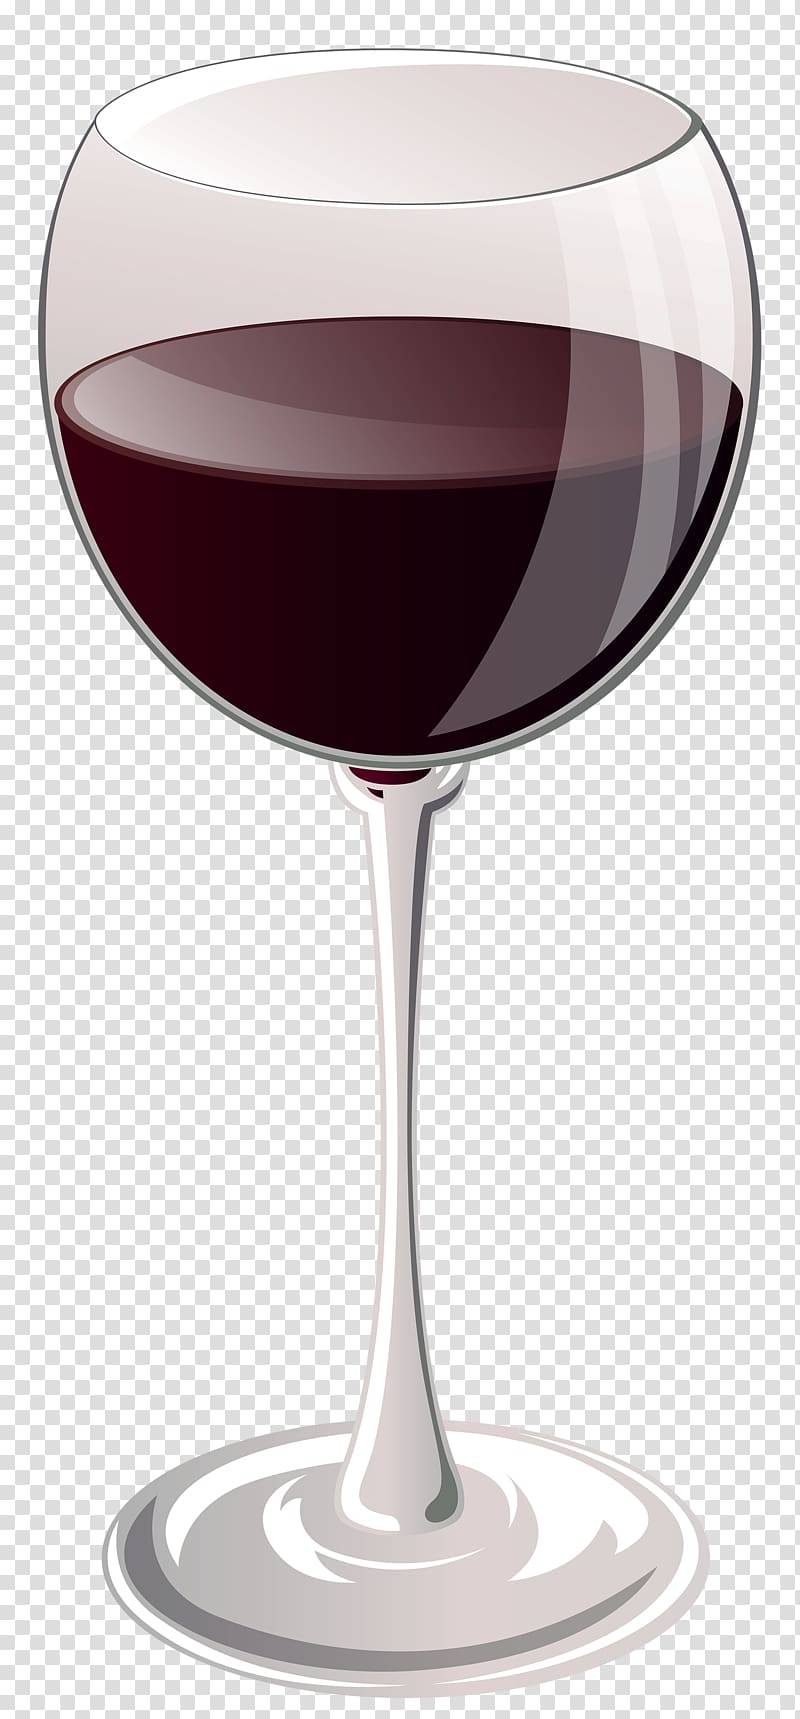 wine glass , White wine Red Wine Champagne Brandy, Glass of Wine transparent background PNG clipart